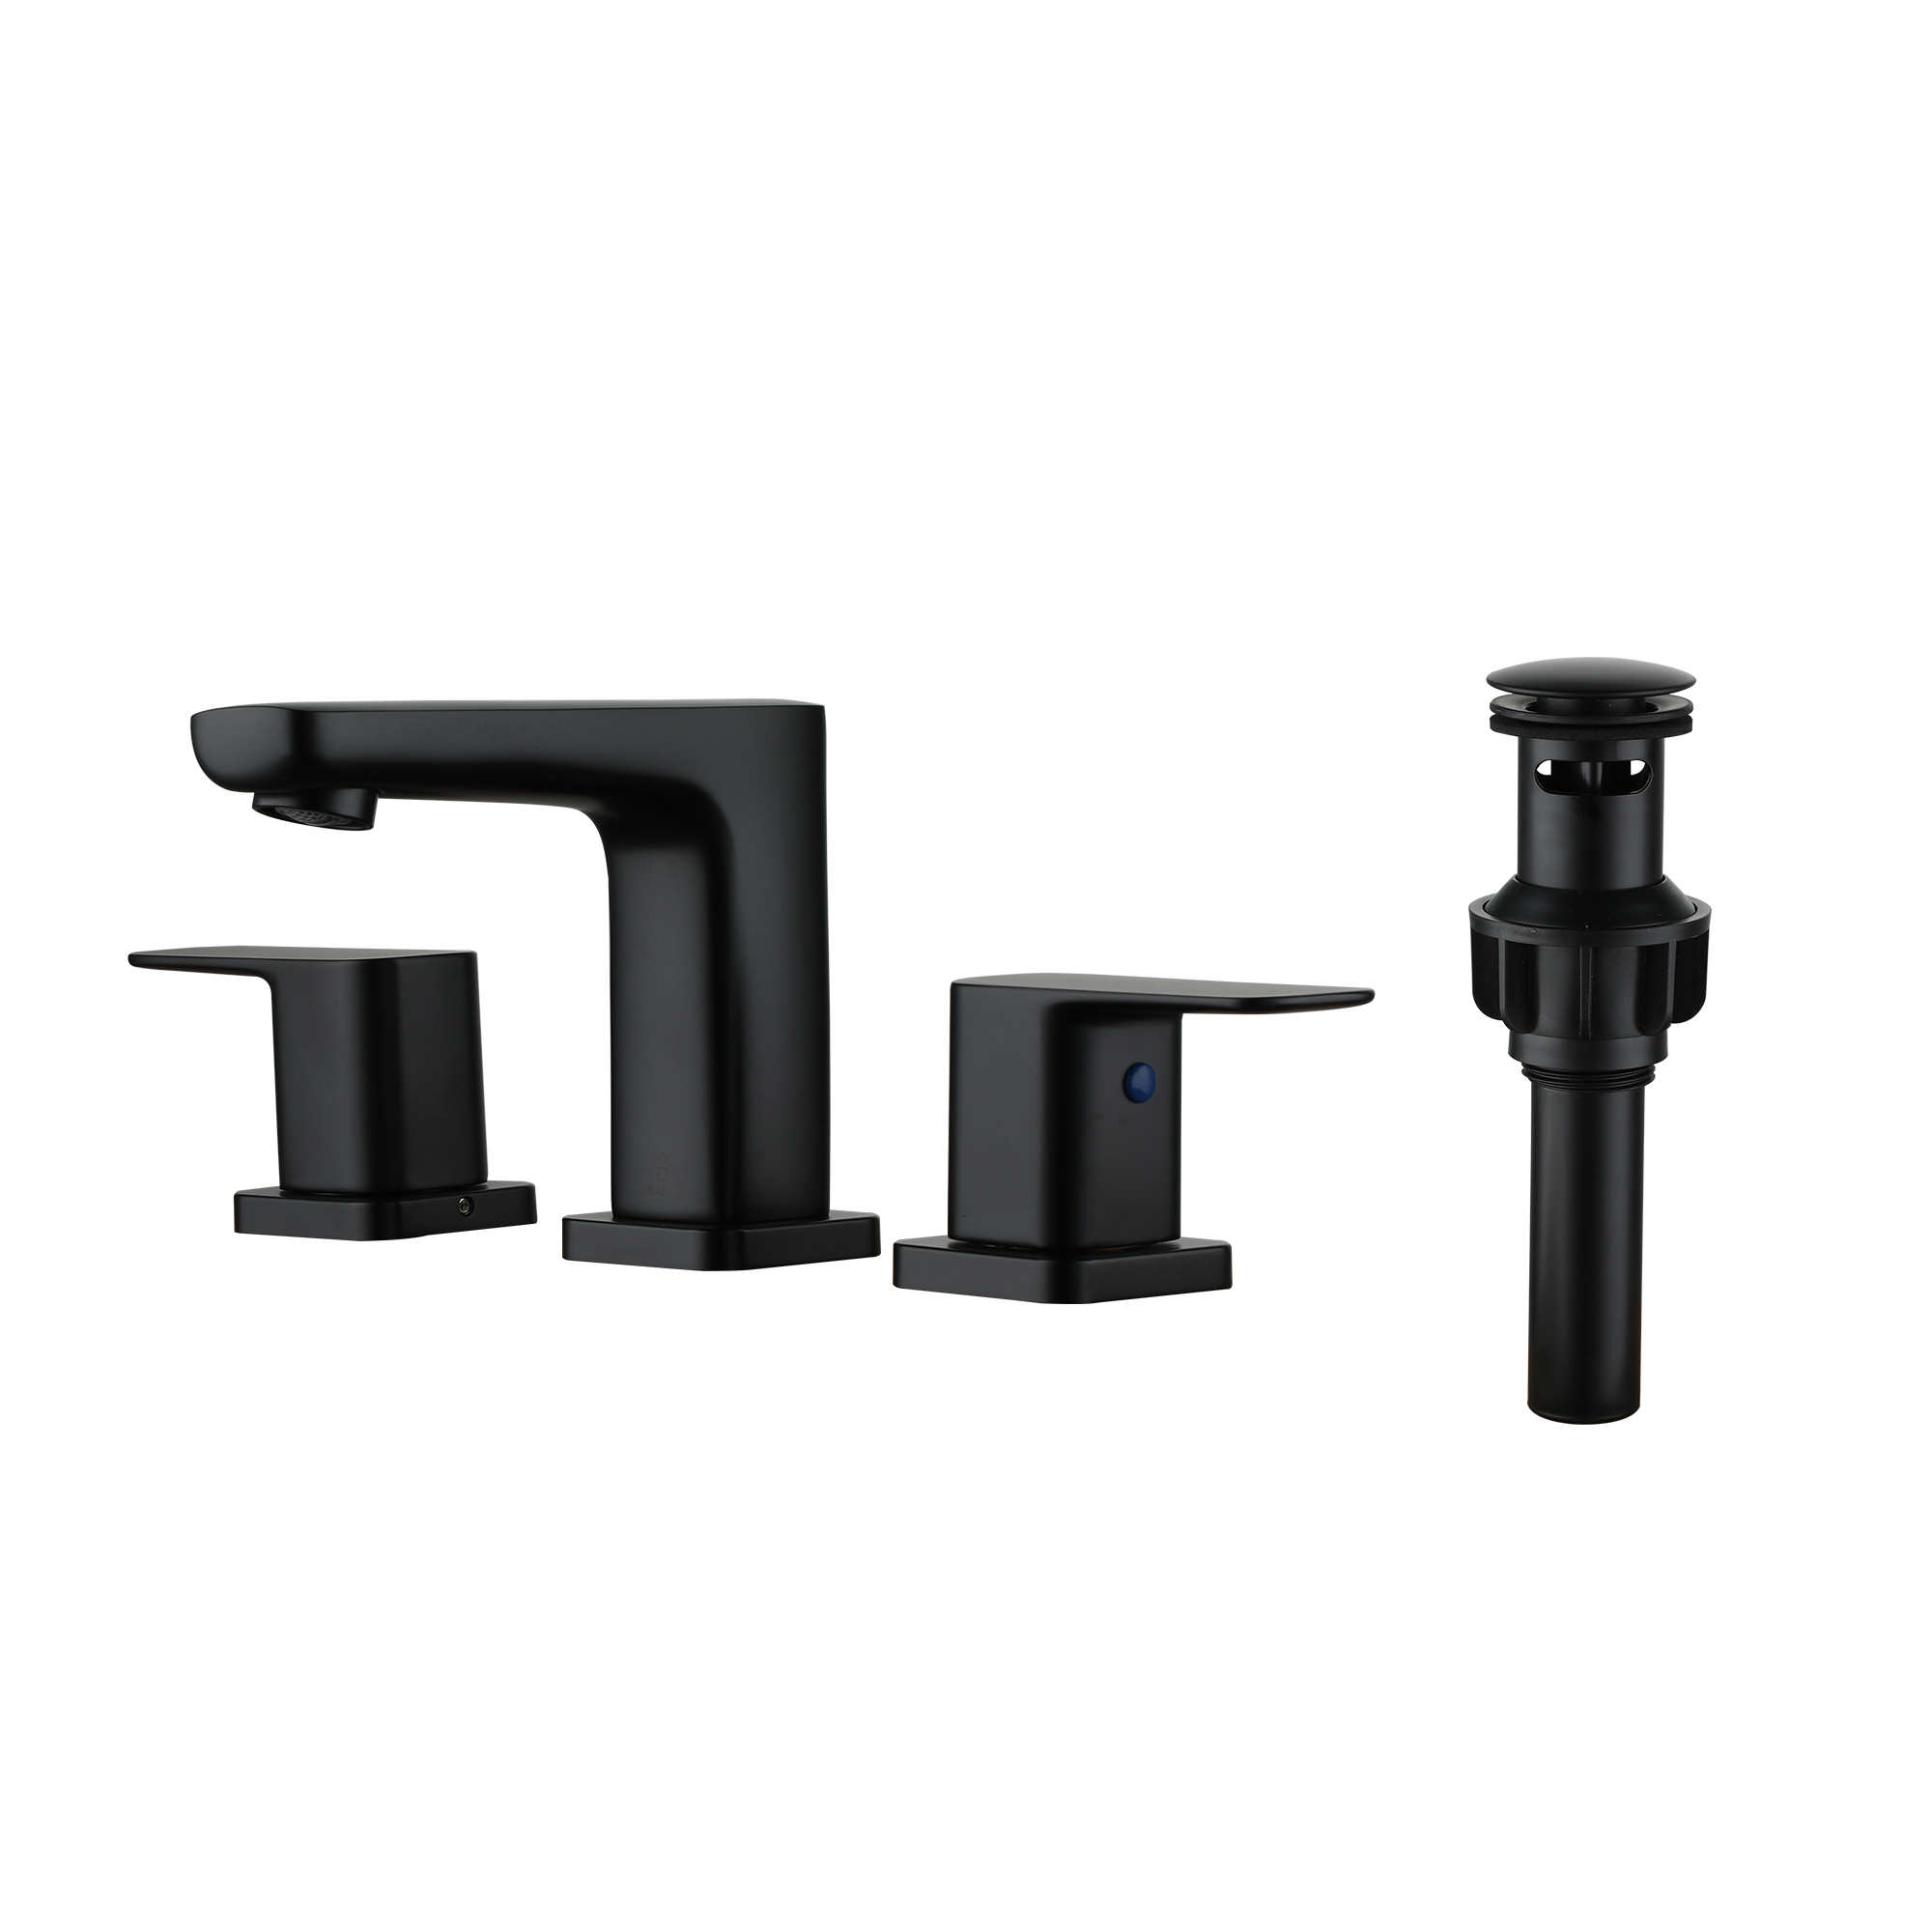 Luxurious 8-Inch Bathroom Sink Faucet Set with Dual Handles, Matte Black Finish